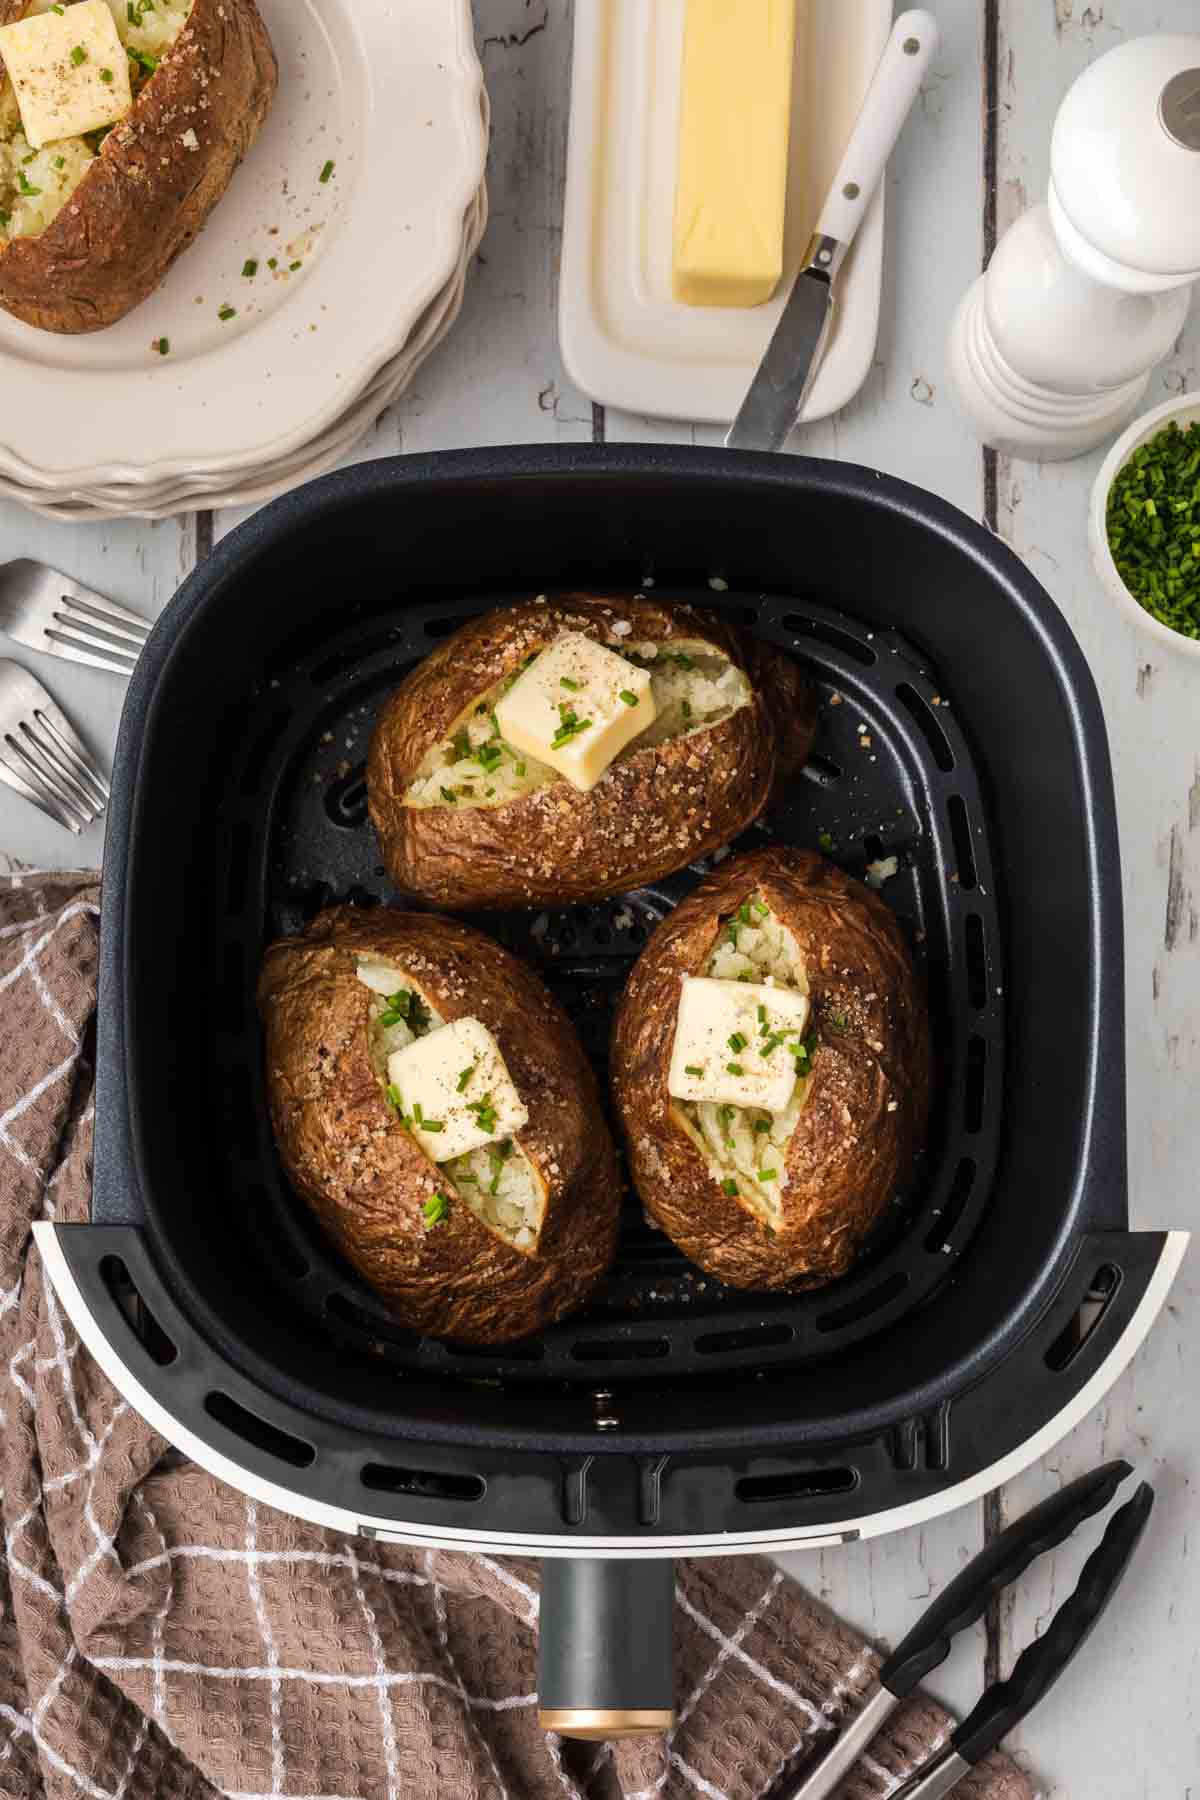 Three air fryer baked potatoes topped with butter and chopped herbs are in an air fryer. Nearby are forks, a knife, a brown kitchen towel, white plates with another potato, a stick of butter on a dish, a pepper grinder, and a bowl of chopped herbs.